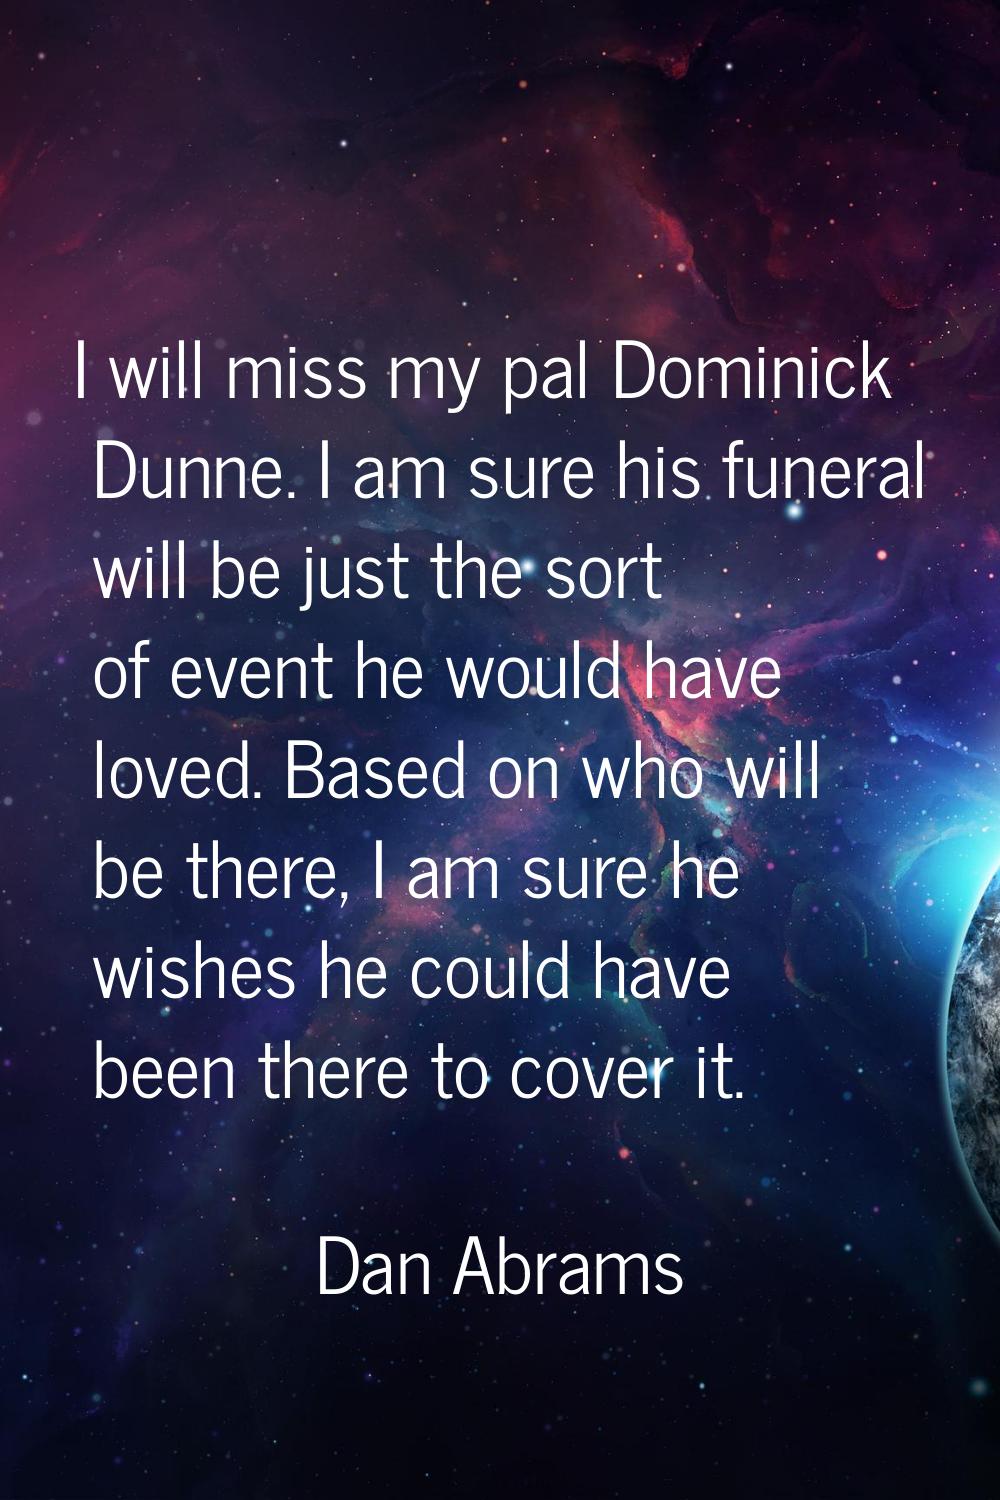 I will miss my pal Dominick Dunne. I am sure his funeral will be just the sort of event he would ha